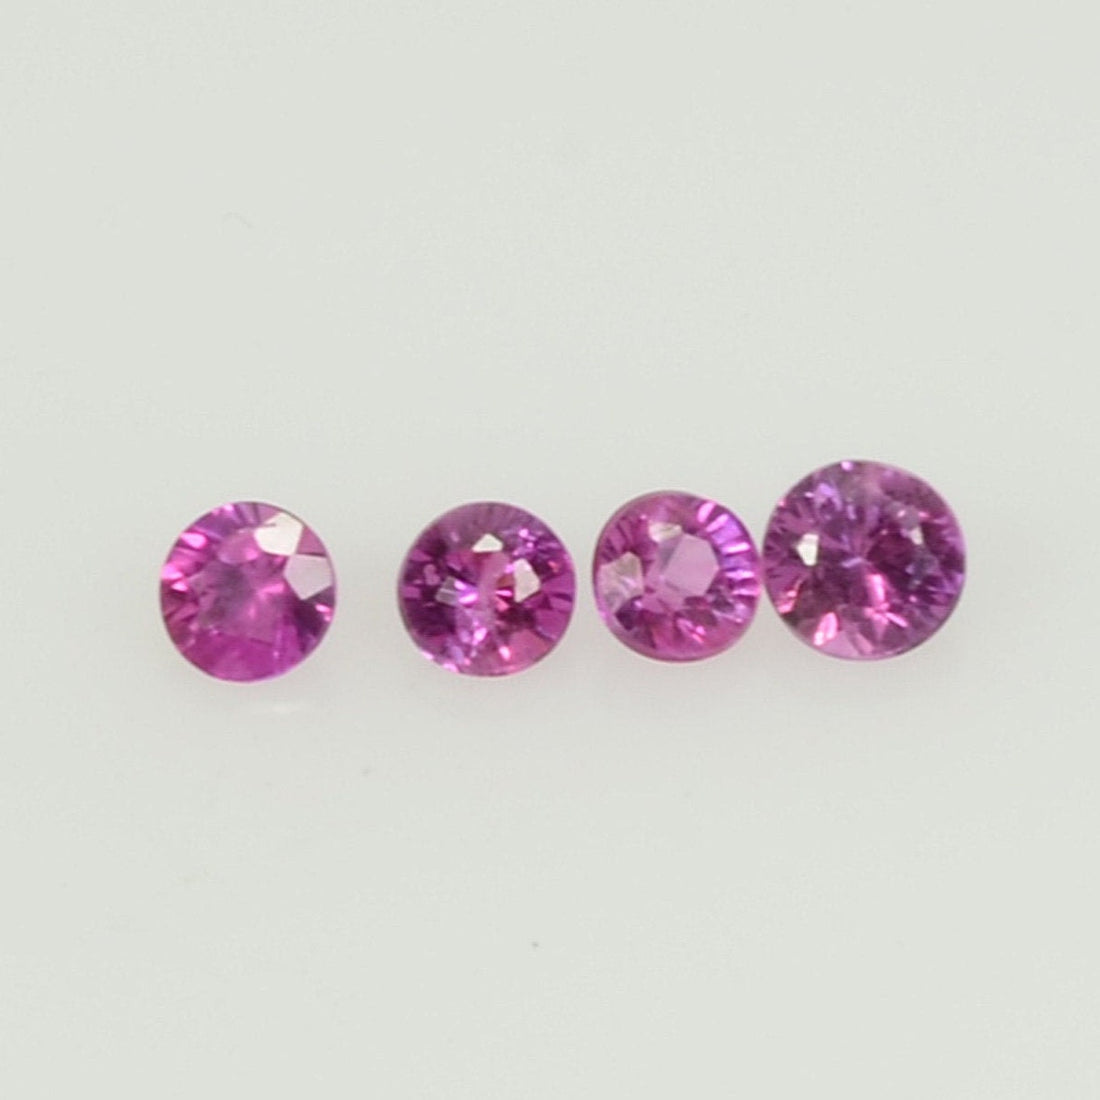 2.0 mm Natural Pink Sapphire Loose Gemstone Round Diamond Cut Vs Quality A+ Color